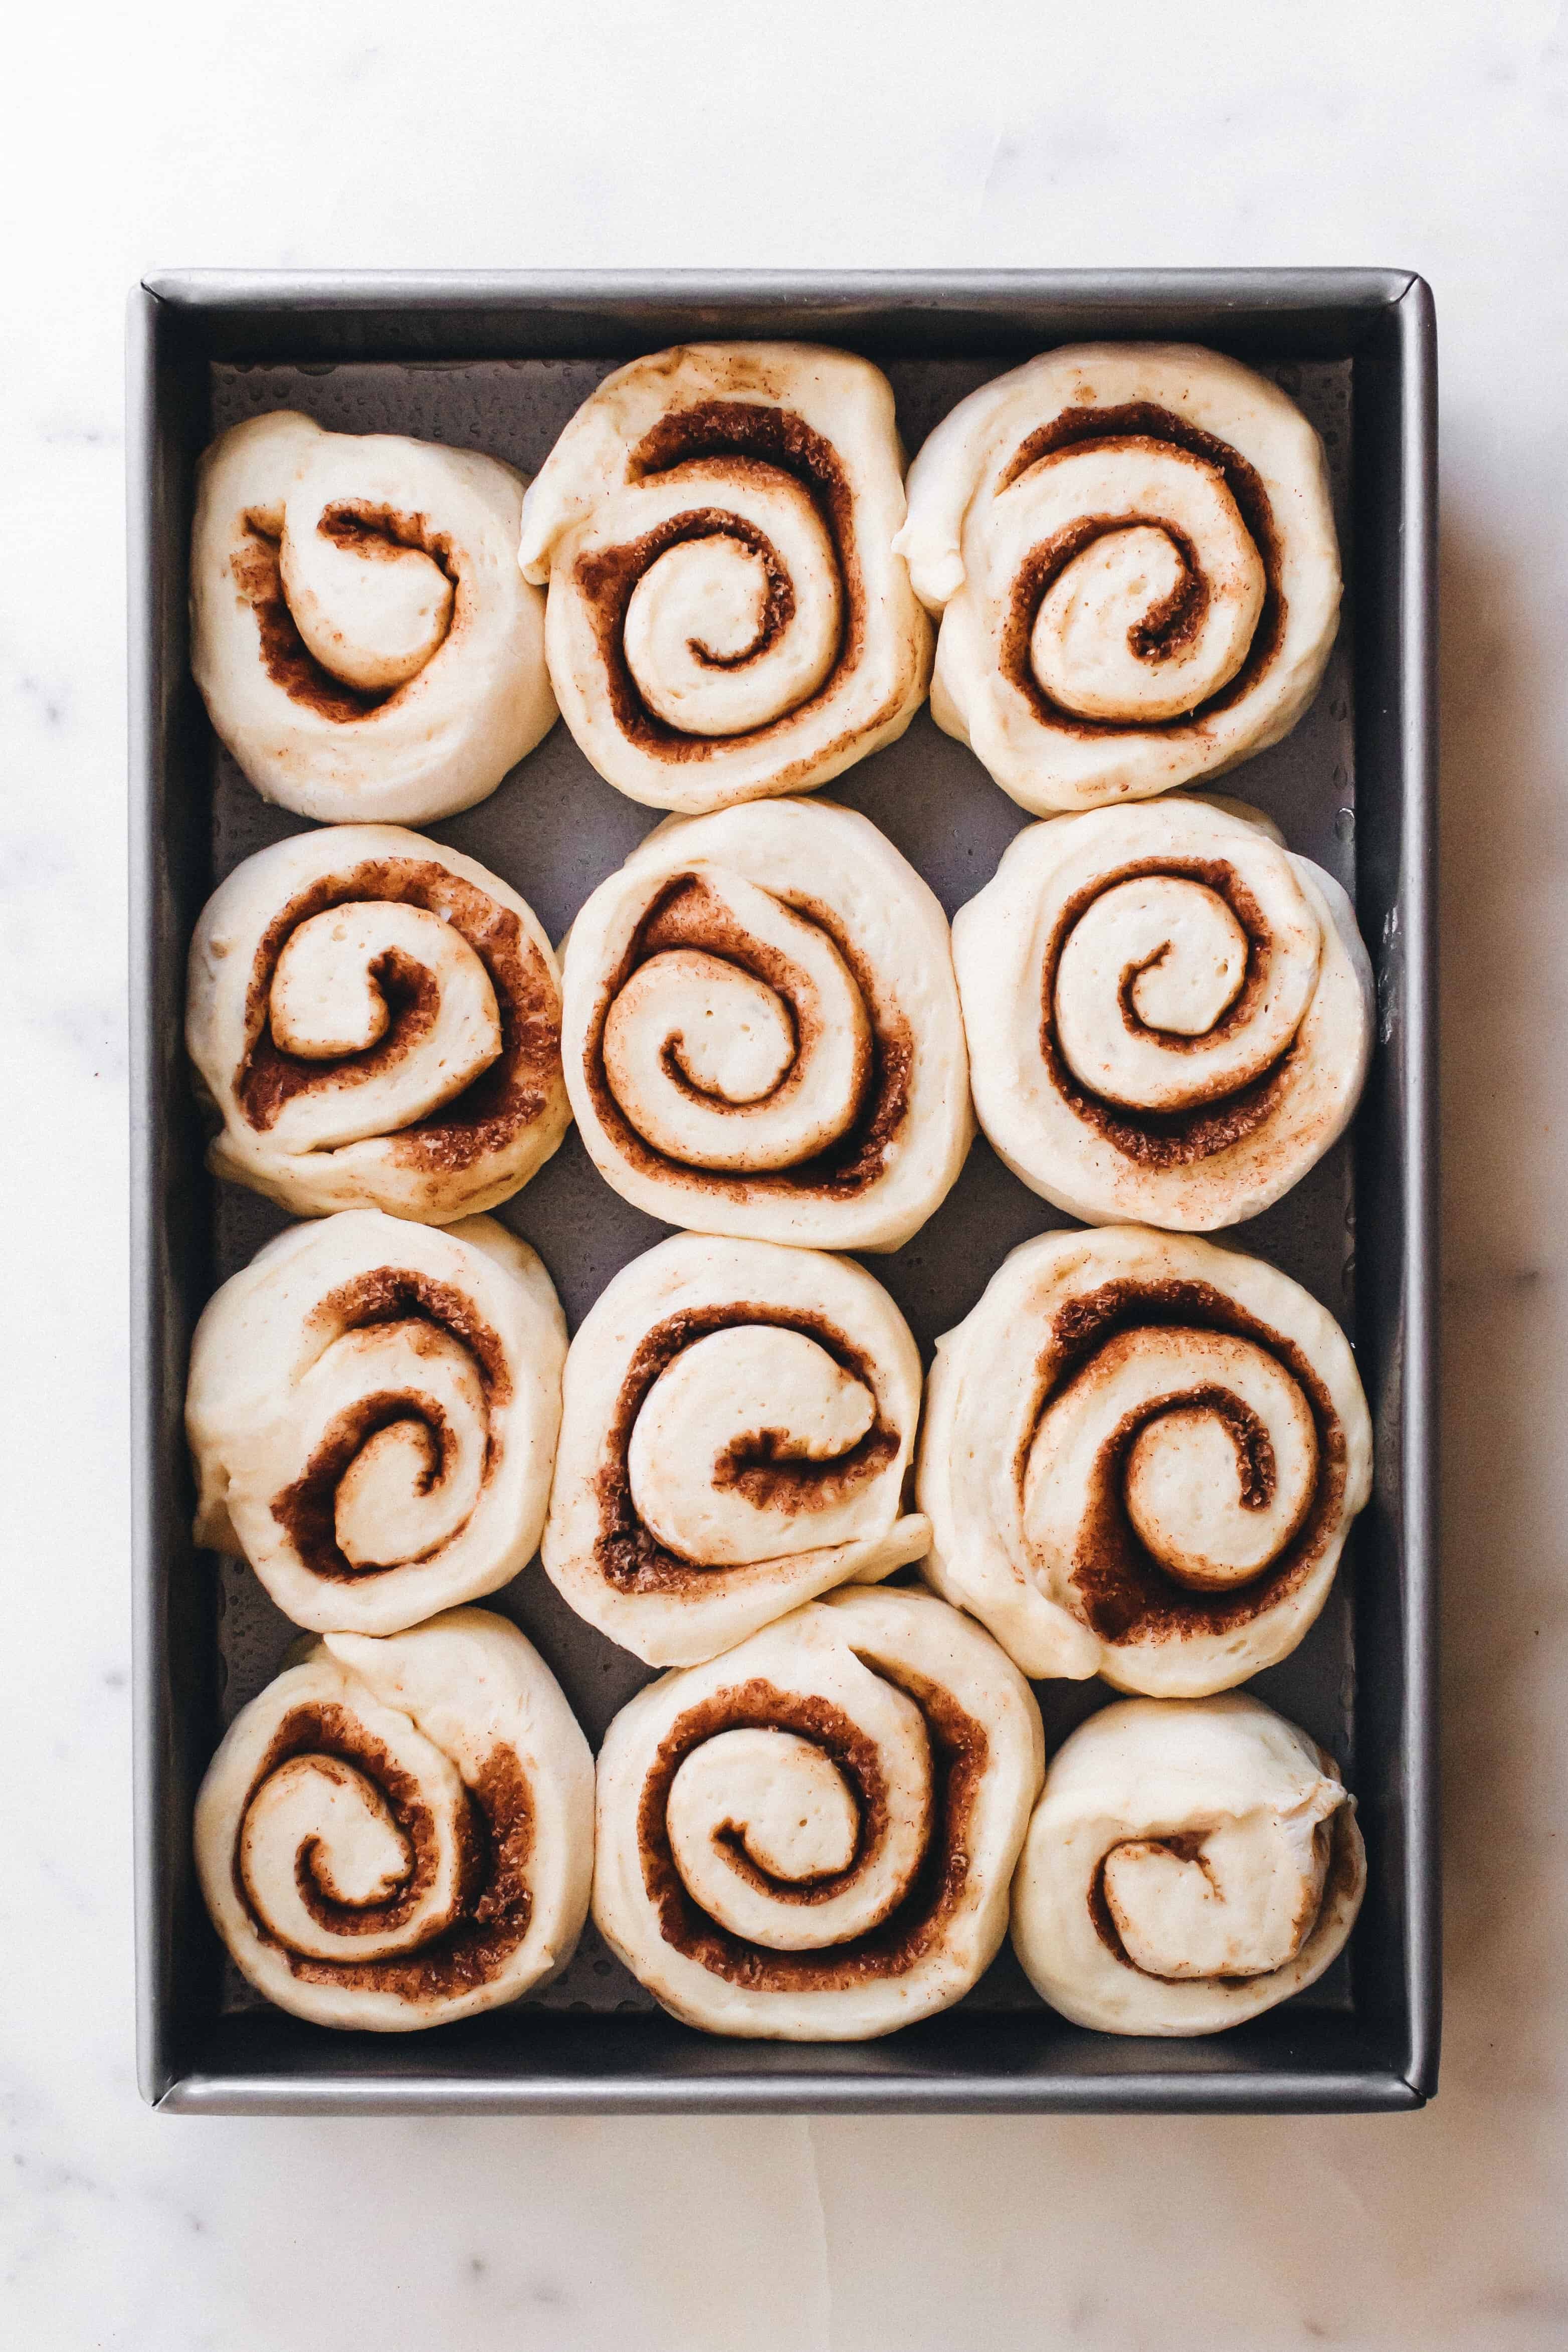 Rolled and cut chai cinnamon rolls in a baking pan, ready to be baked